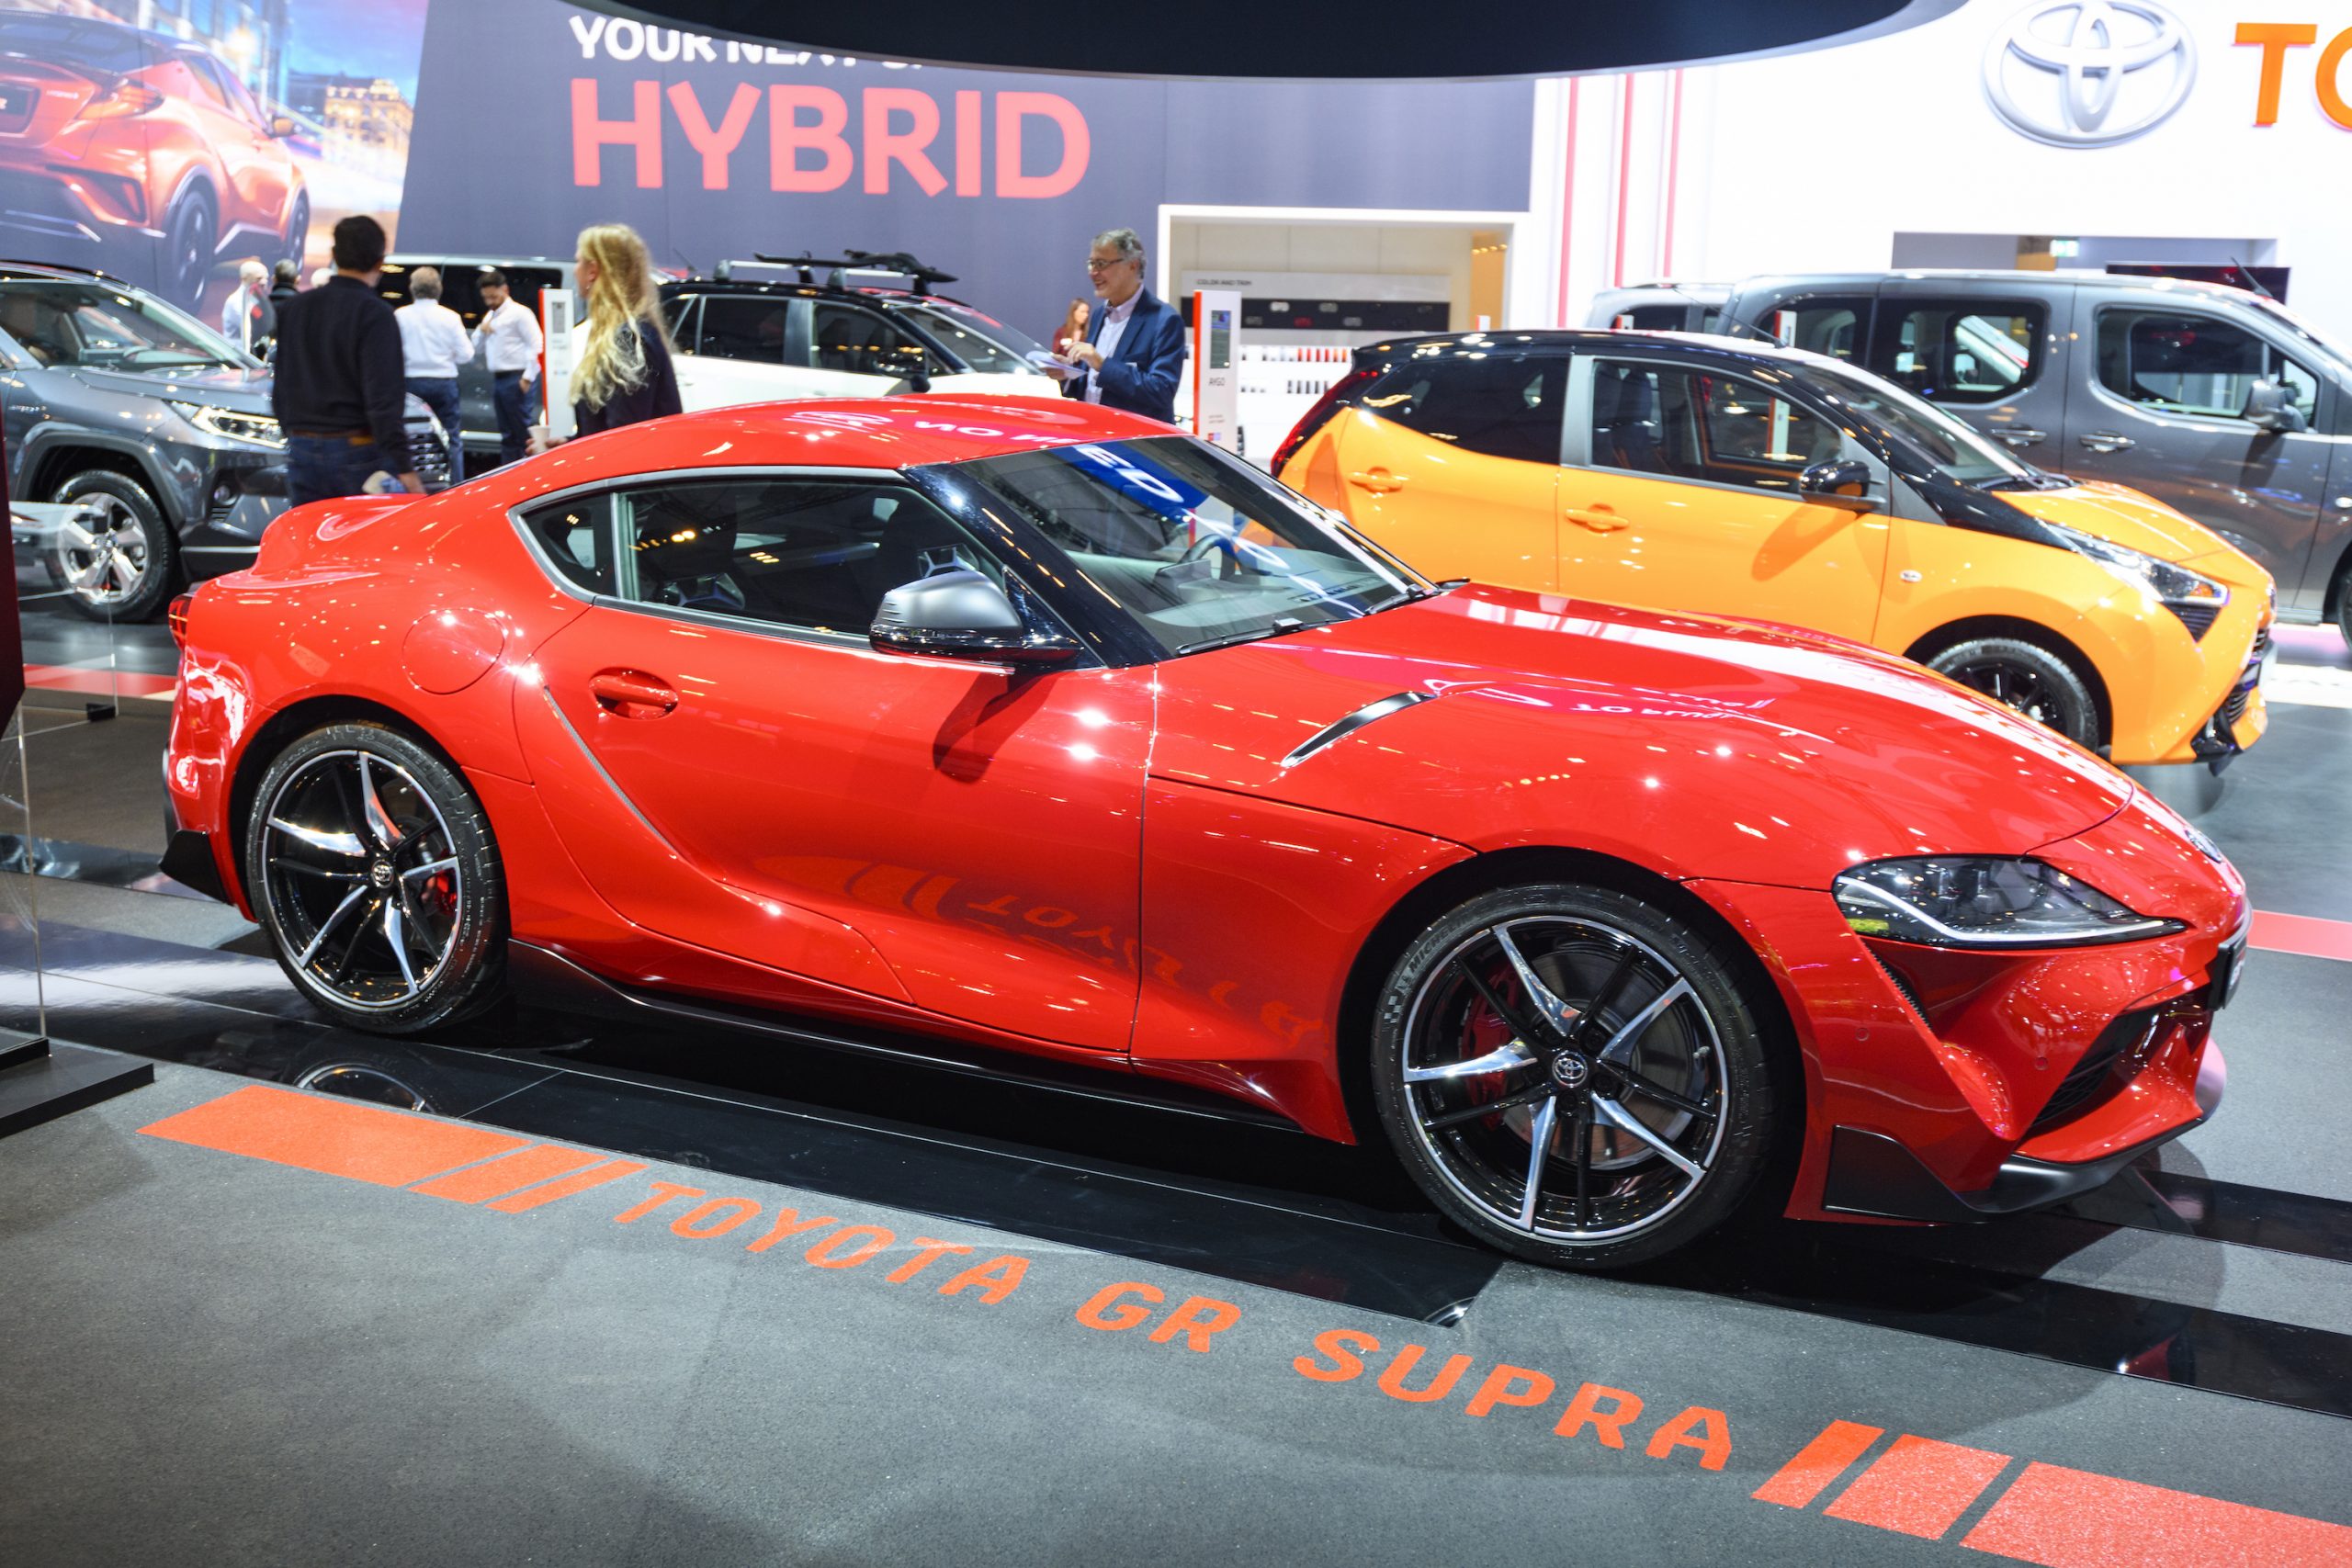 2021 Toyota Supra in red at a car show